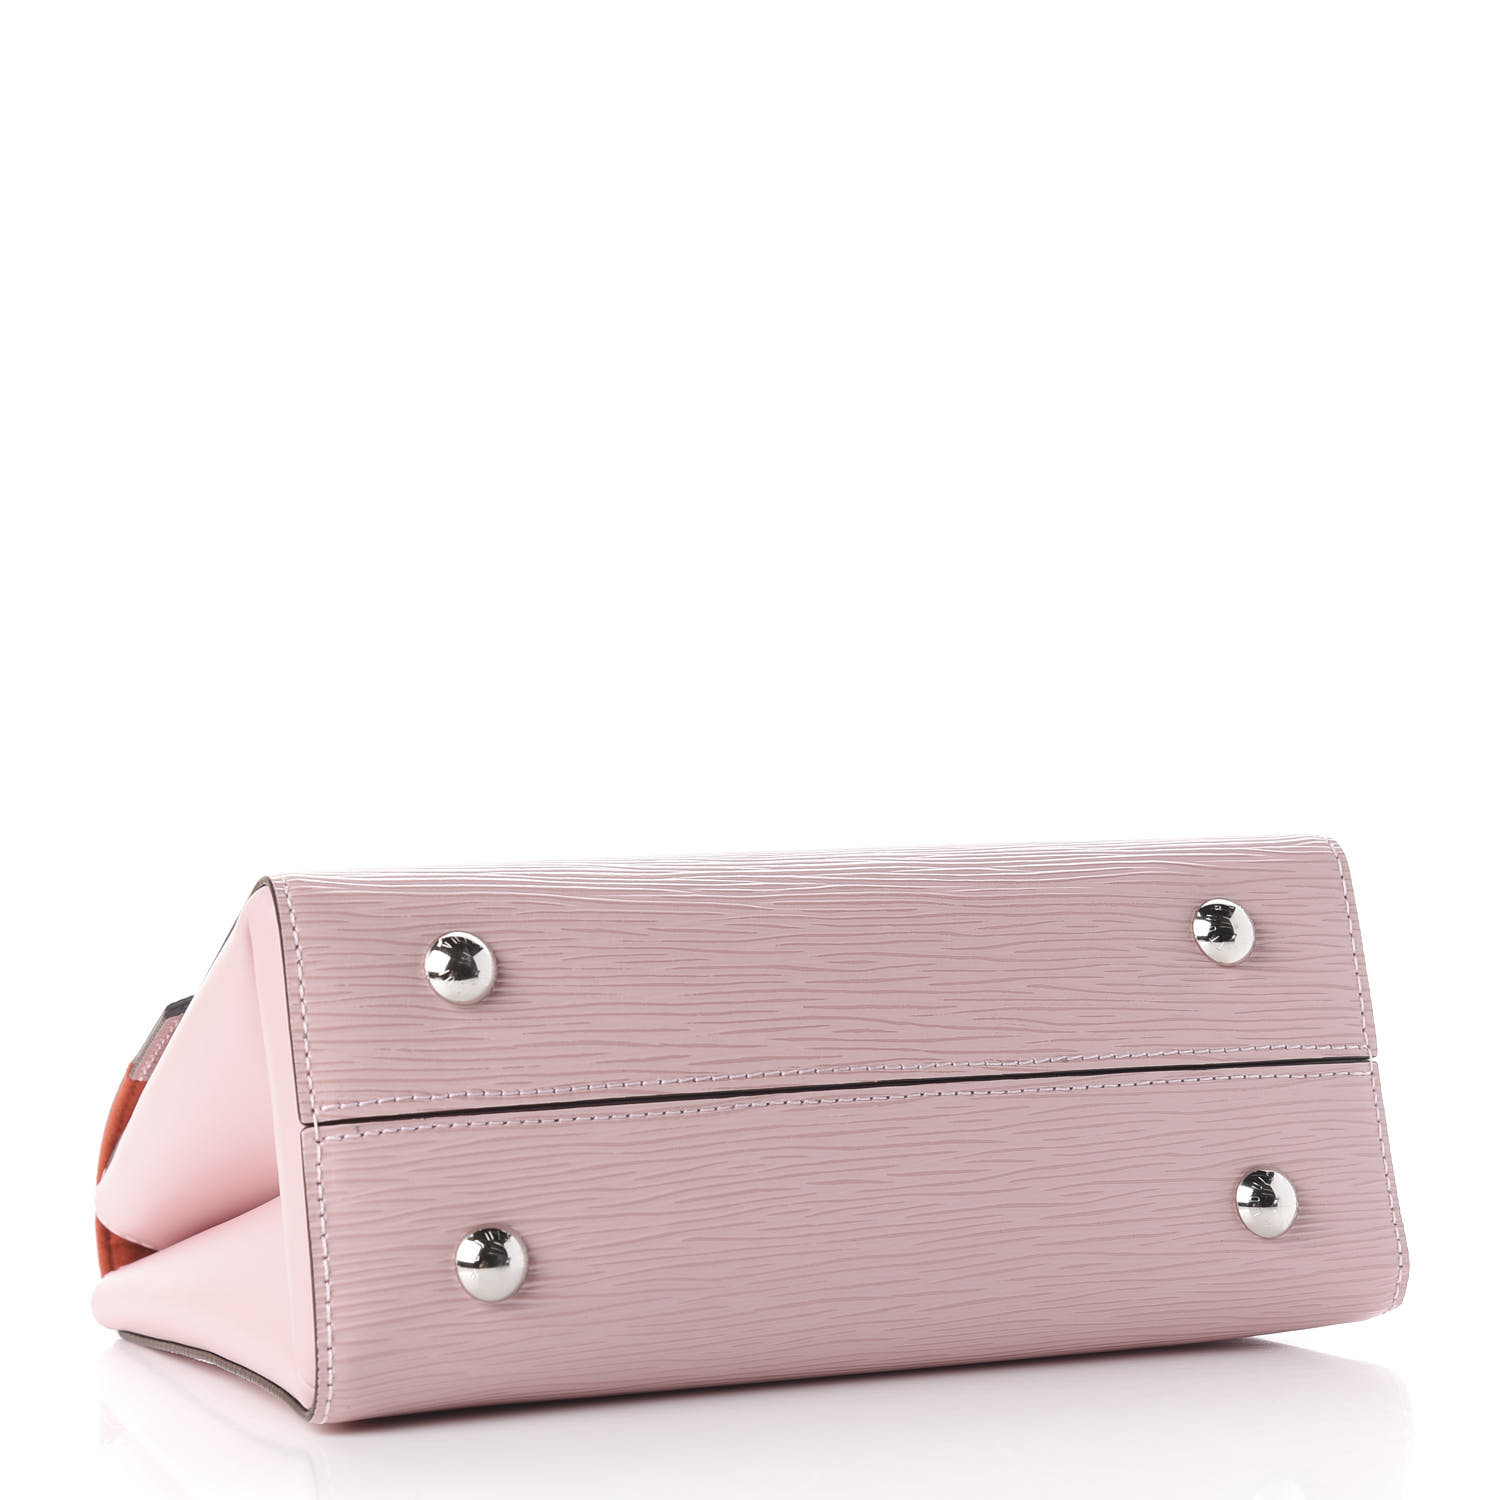 Louis Vuitton Grenelle PM, Pink, One Size